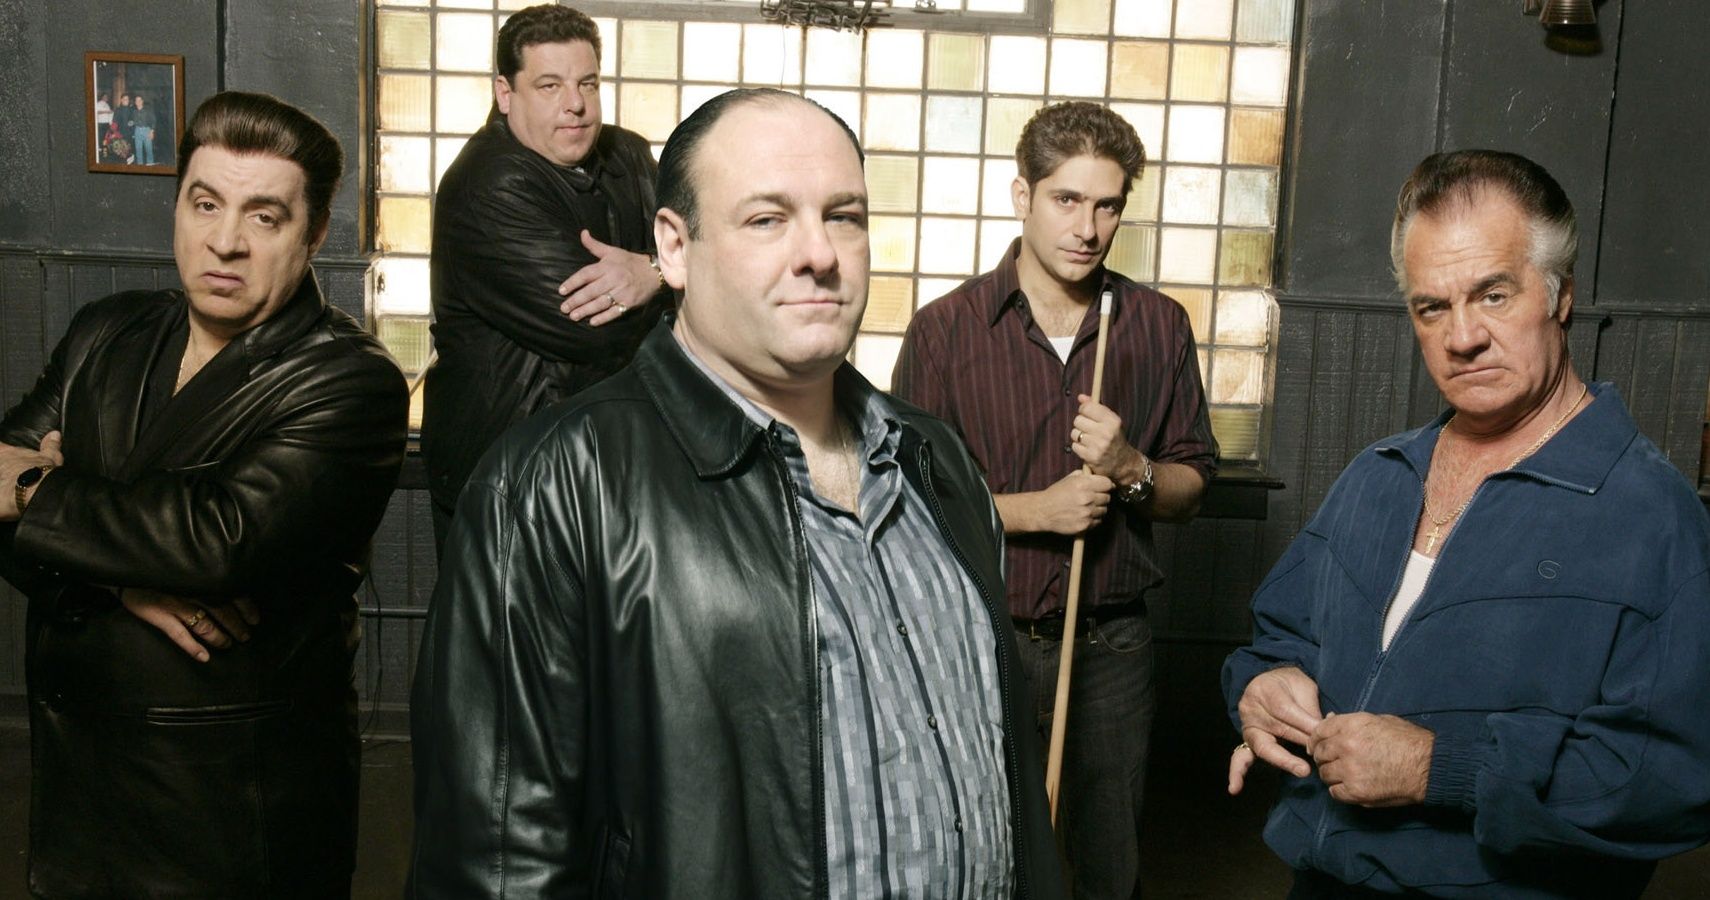 The Sopranos: Characters With The Highest Kill Count, Ranked